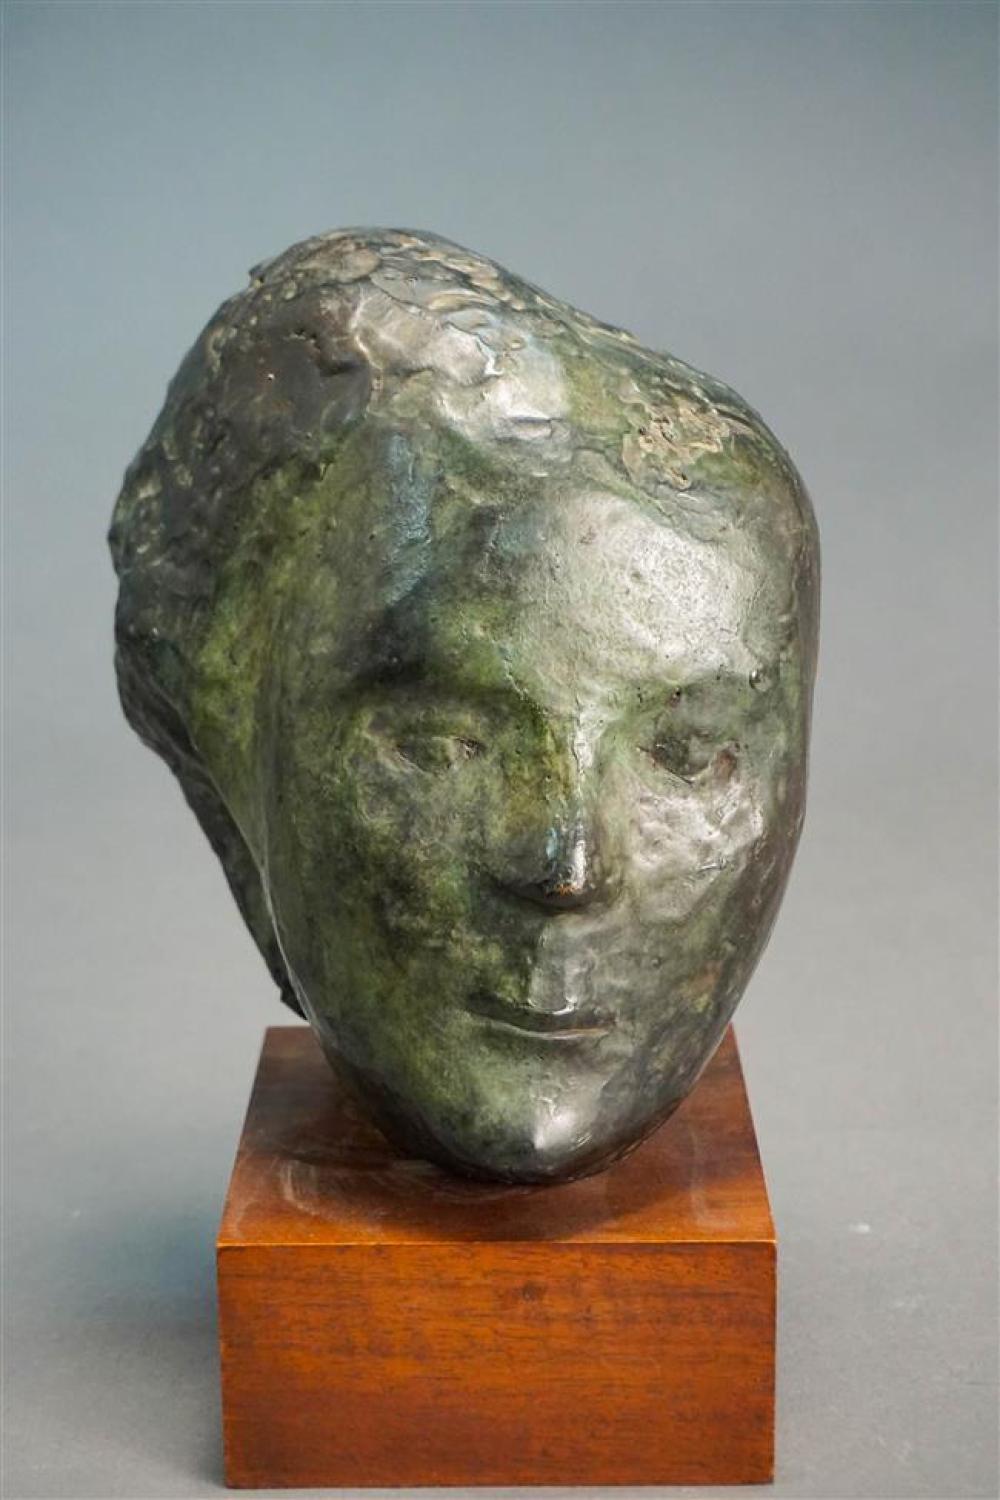 BRONZE BUST OF A WOMAN ON WOOD PLINTH,